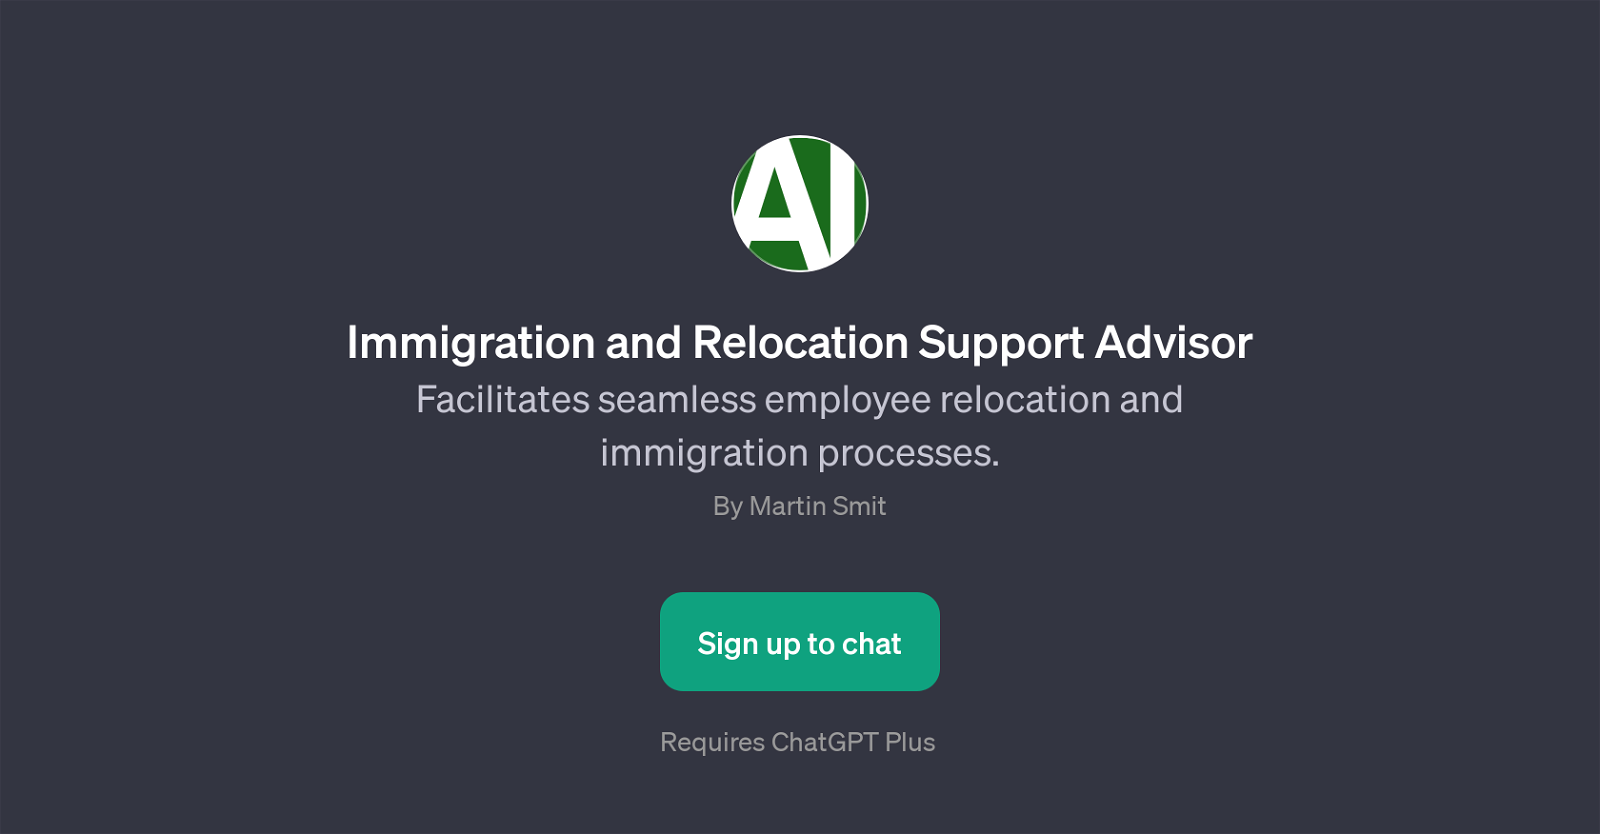 Immigration and Relocation Support Advisor website